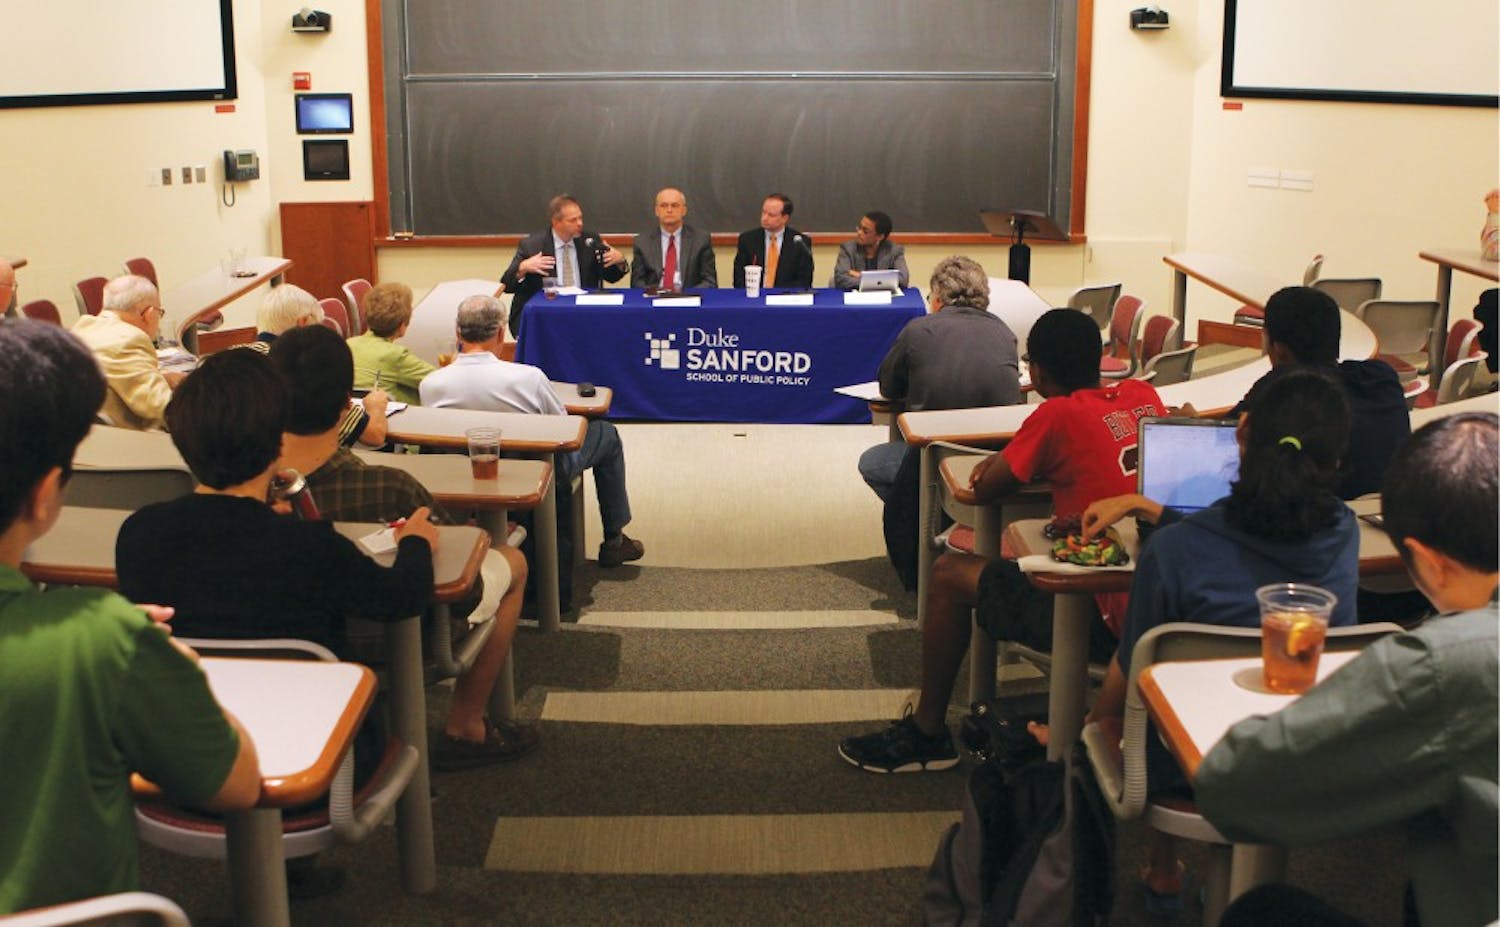 Political experts discussed health care and education, among other topics, during a panel on North Carolina politics Tuesday.